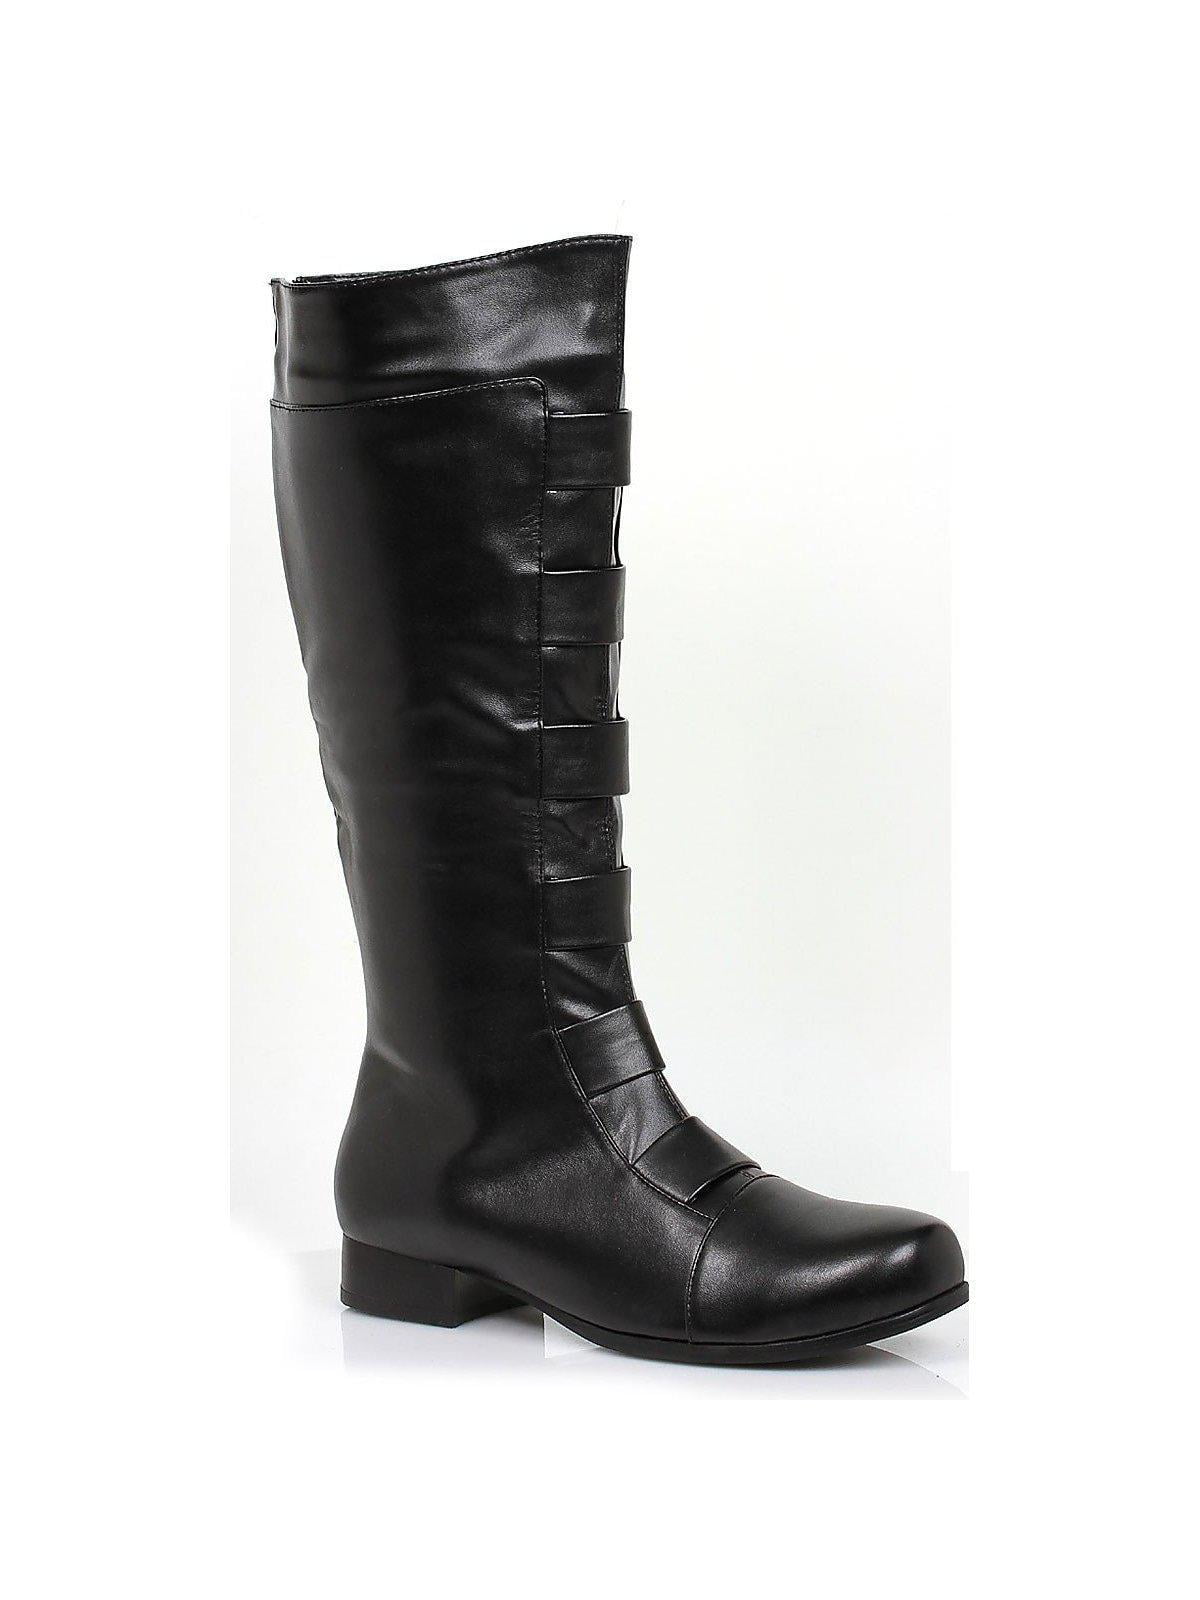 mens knee high boots size 13